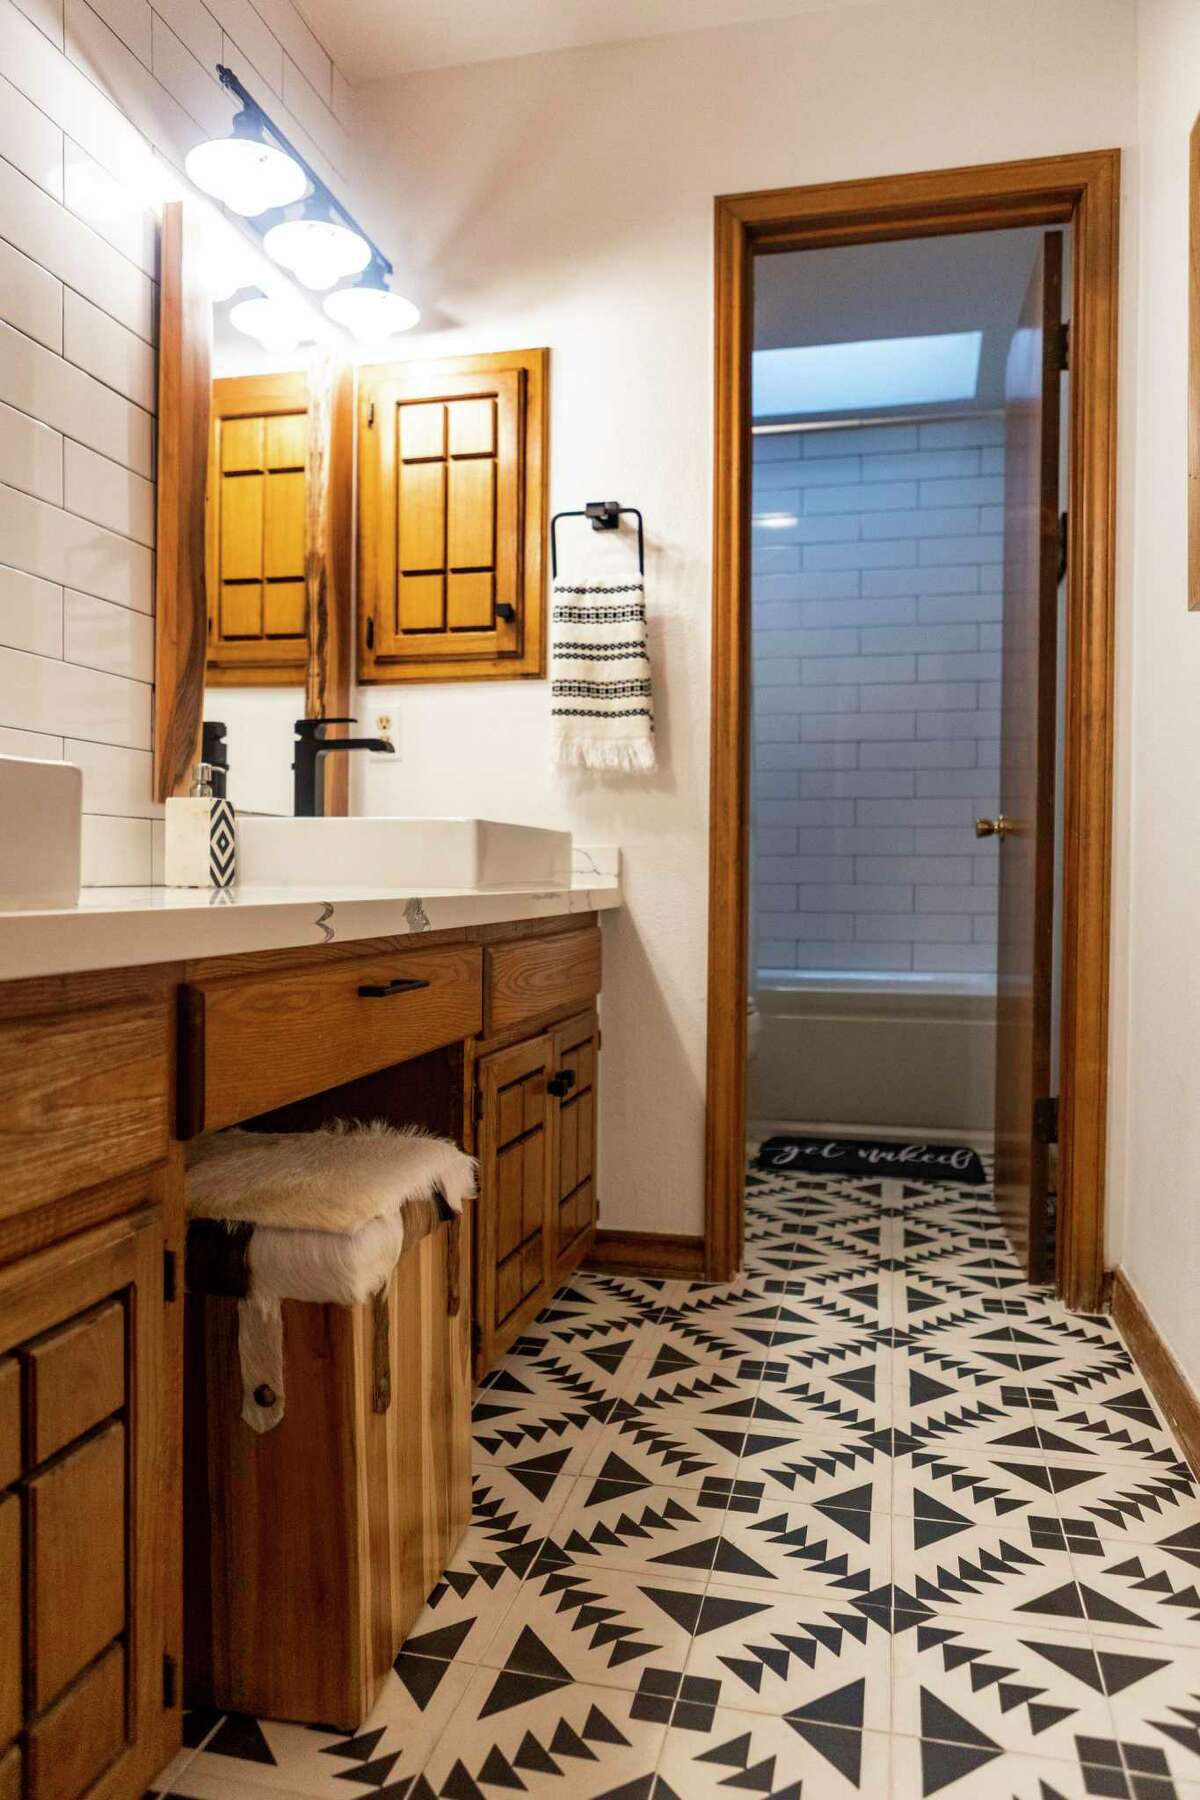 Pressed concrete tiles are a main feature the upstairs bathroom.